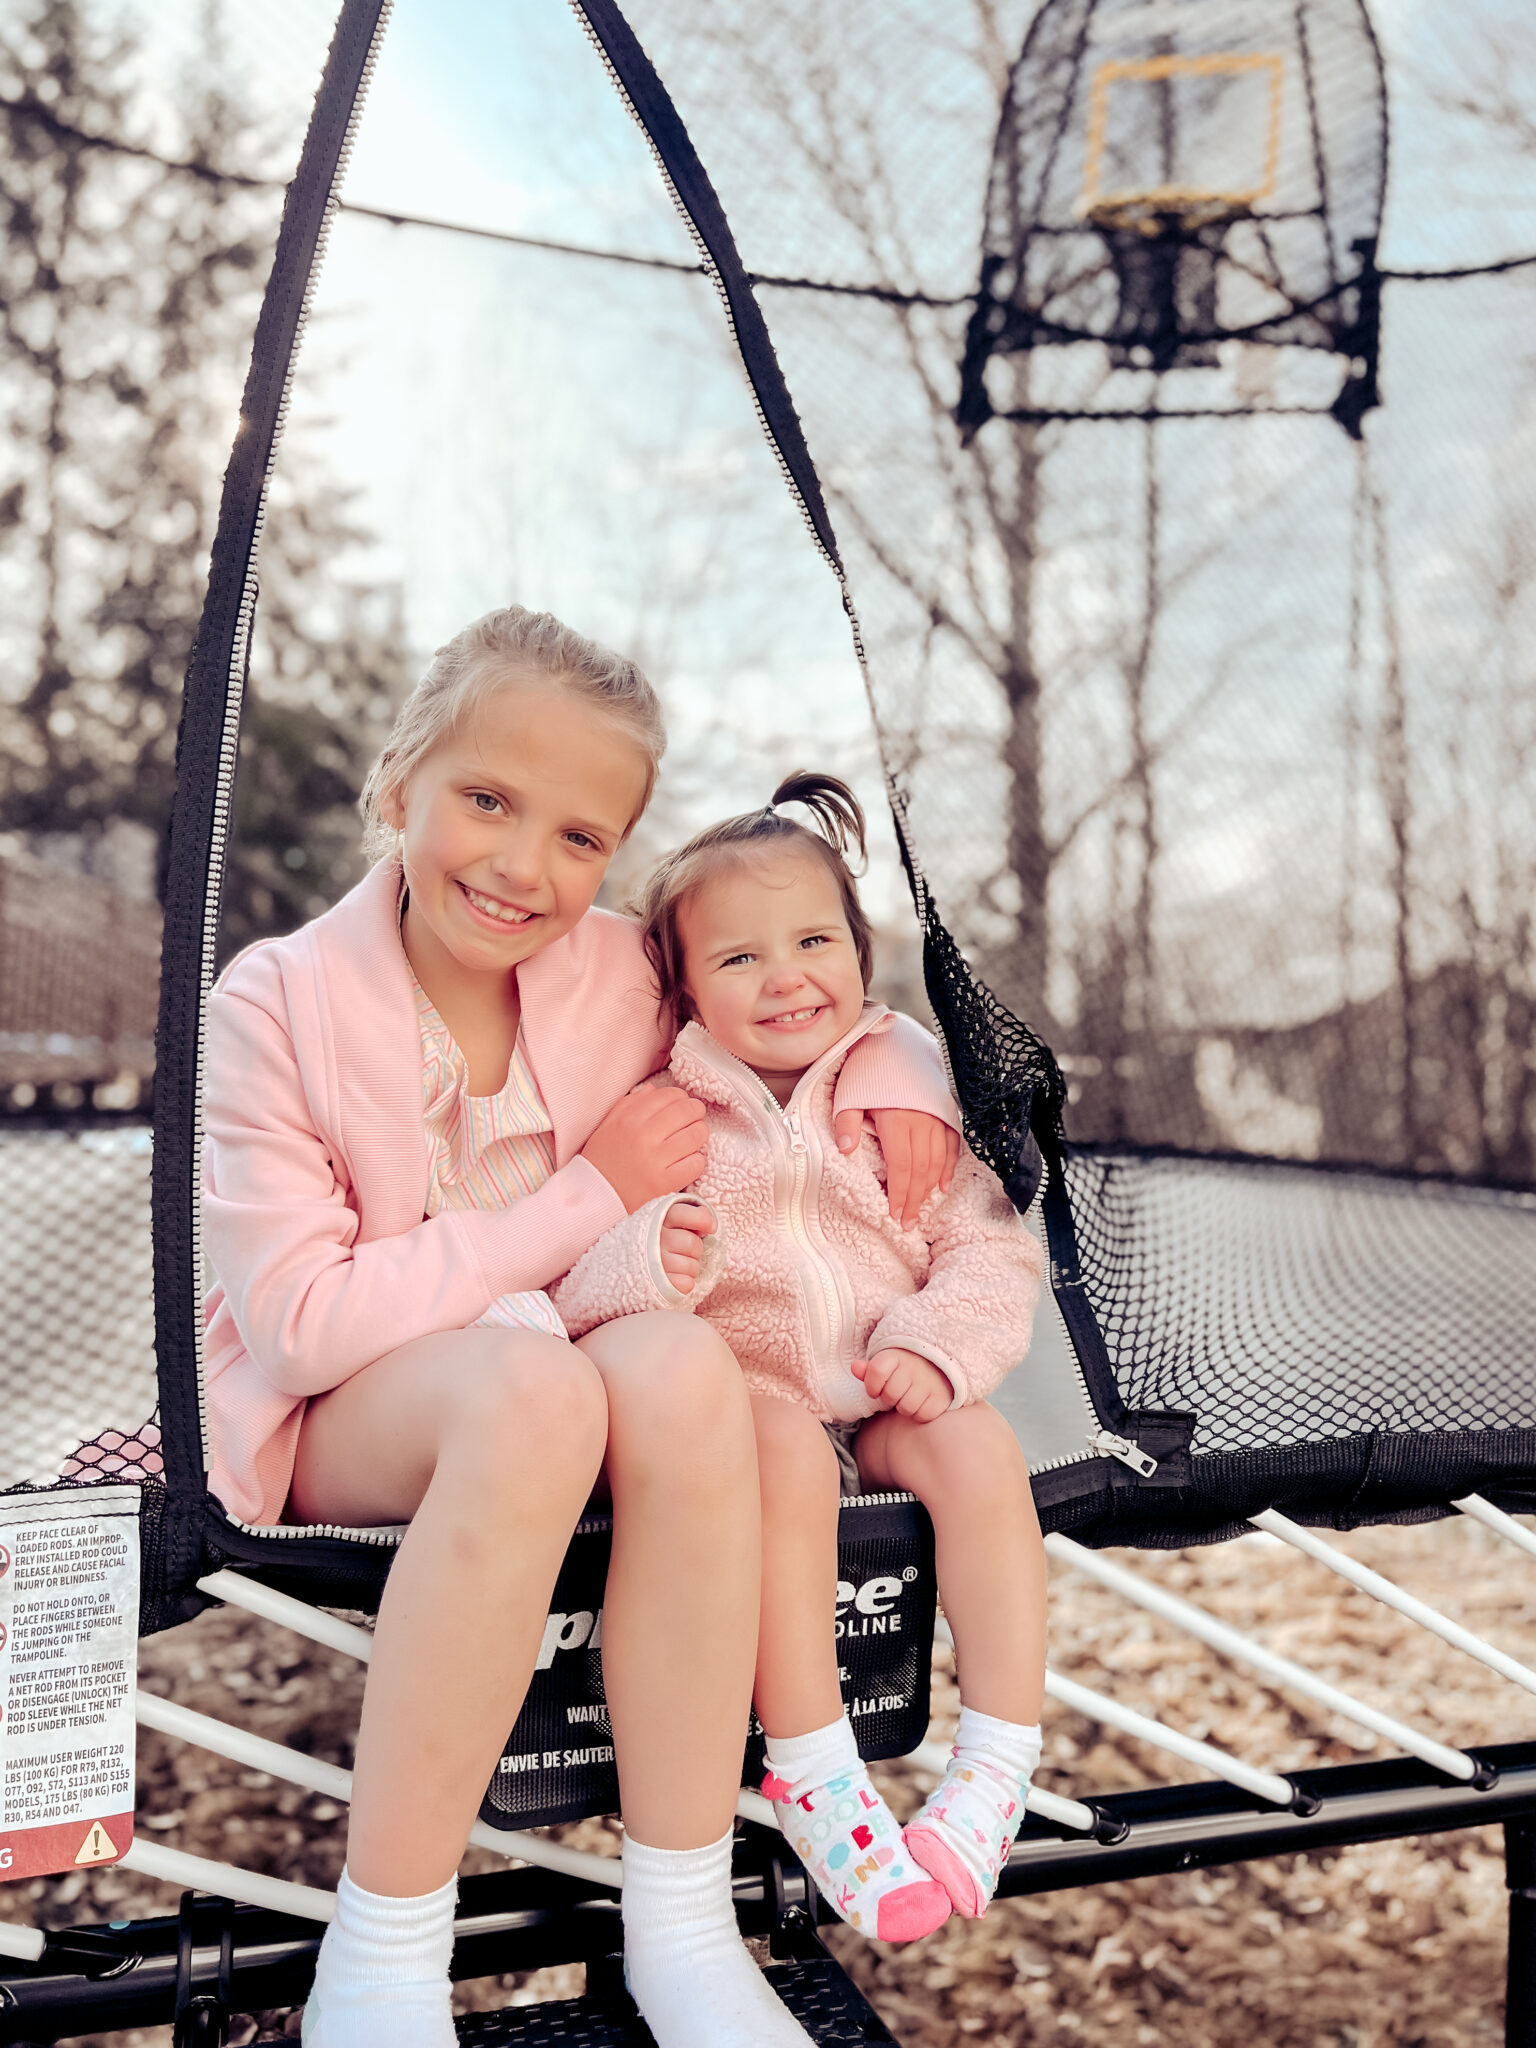 A review of the safest trampoline in the world, Springfree trampolines get kids outdoors, active, and making memories all summer as a family. Family Fun | Outdoors | Activities | Exercise | Backyard Fun | Birthday Parties | Movie Night | Camping | Summertime | Sumer Fun | Children | Motherhood | Parenting | Summer Ideas | Safety | Safest |